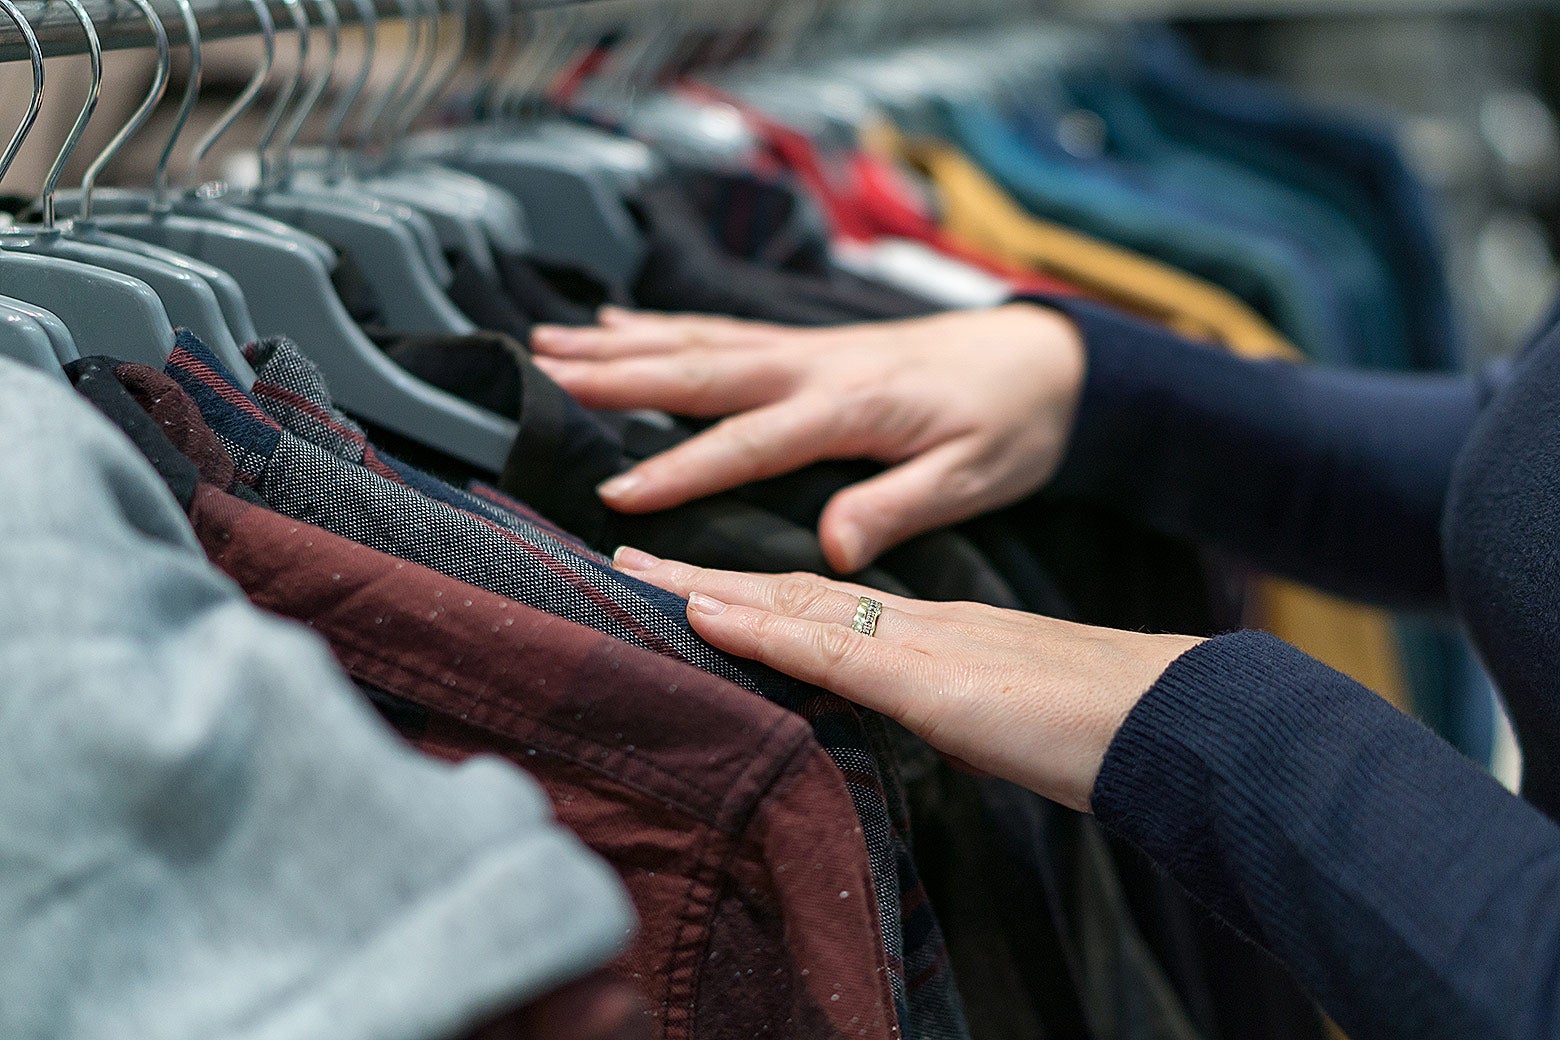 Stock image of a person searching through a rack of clothing.